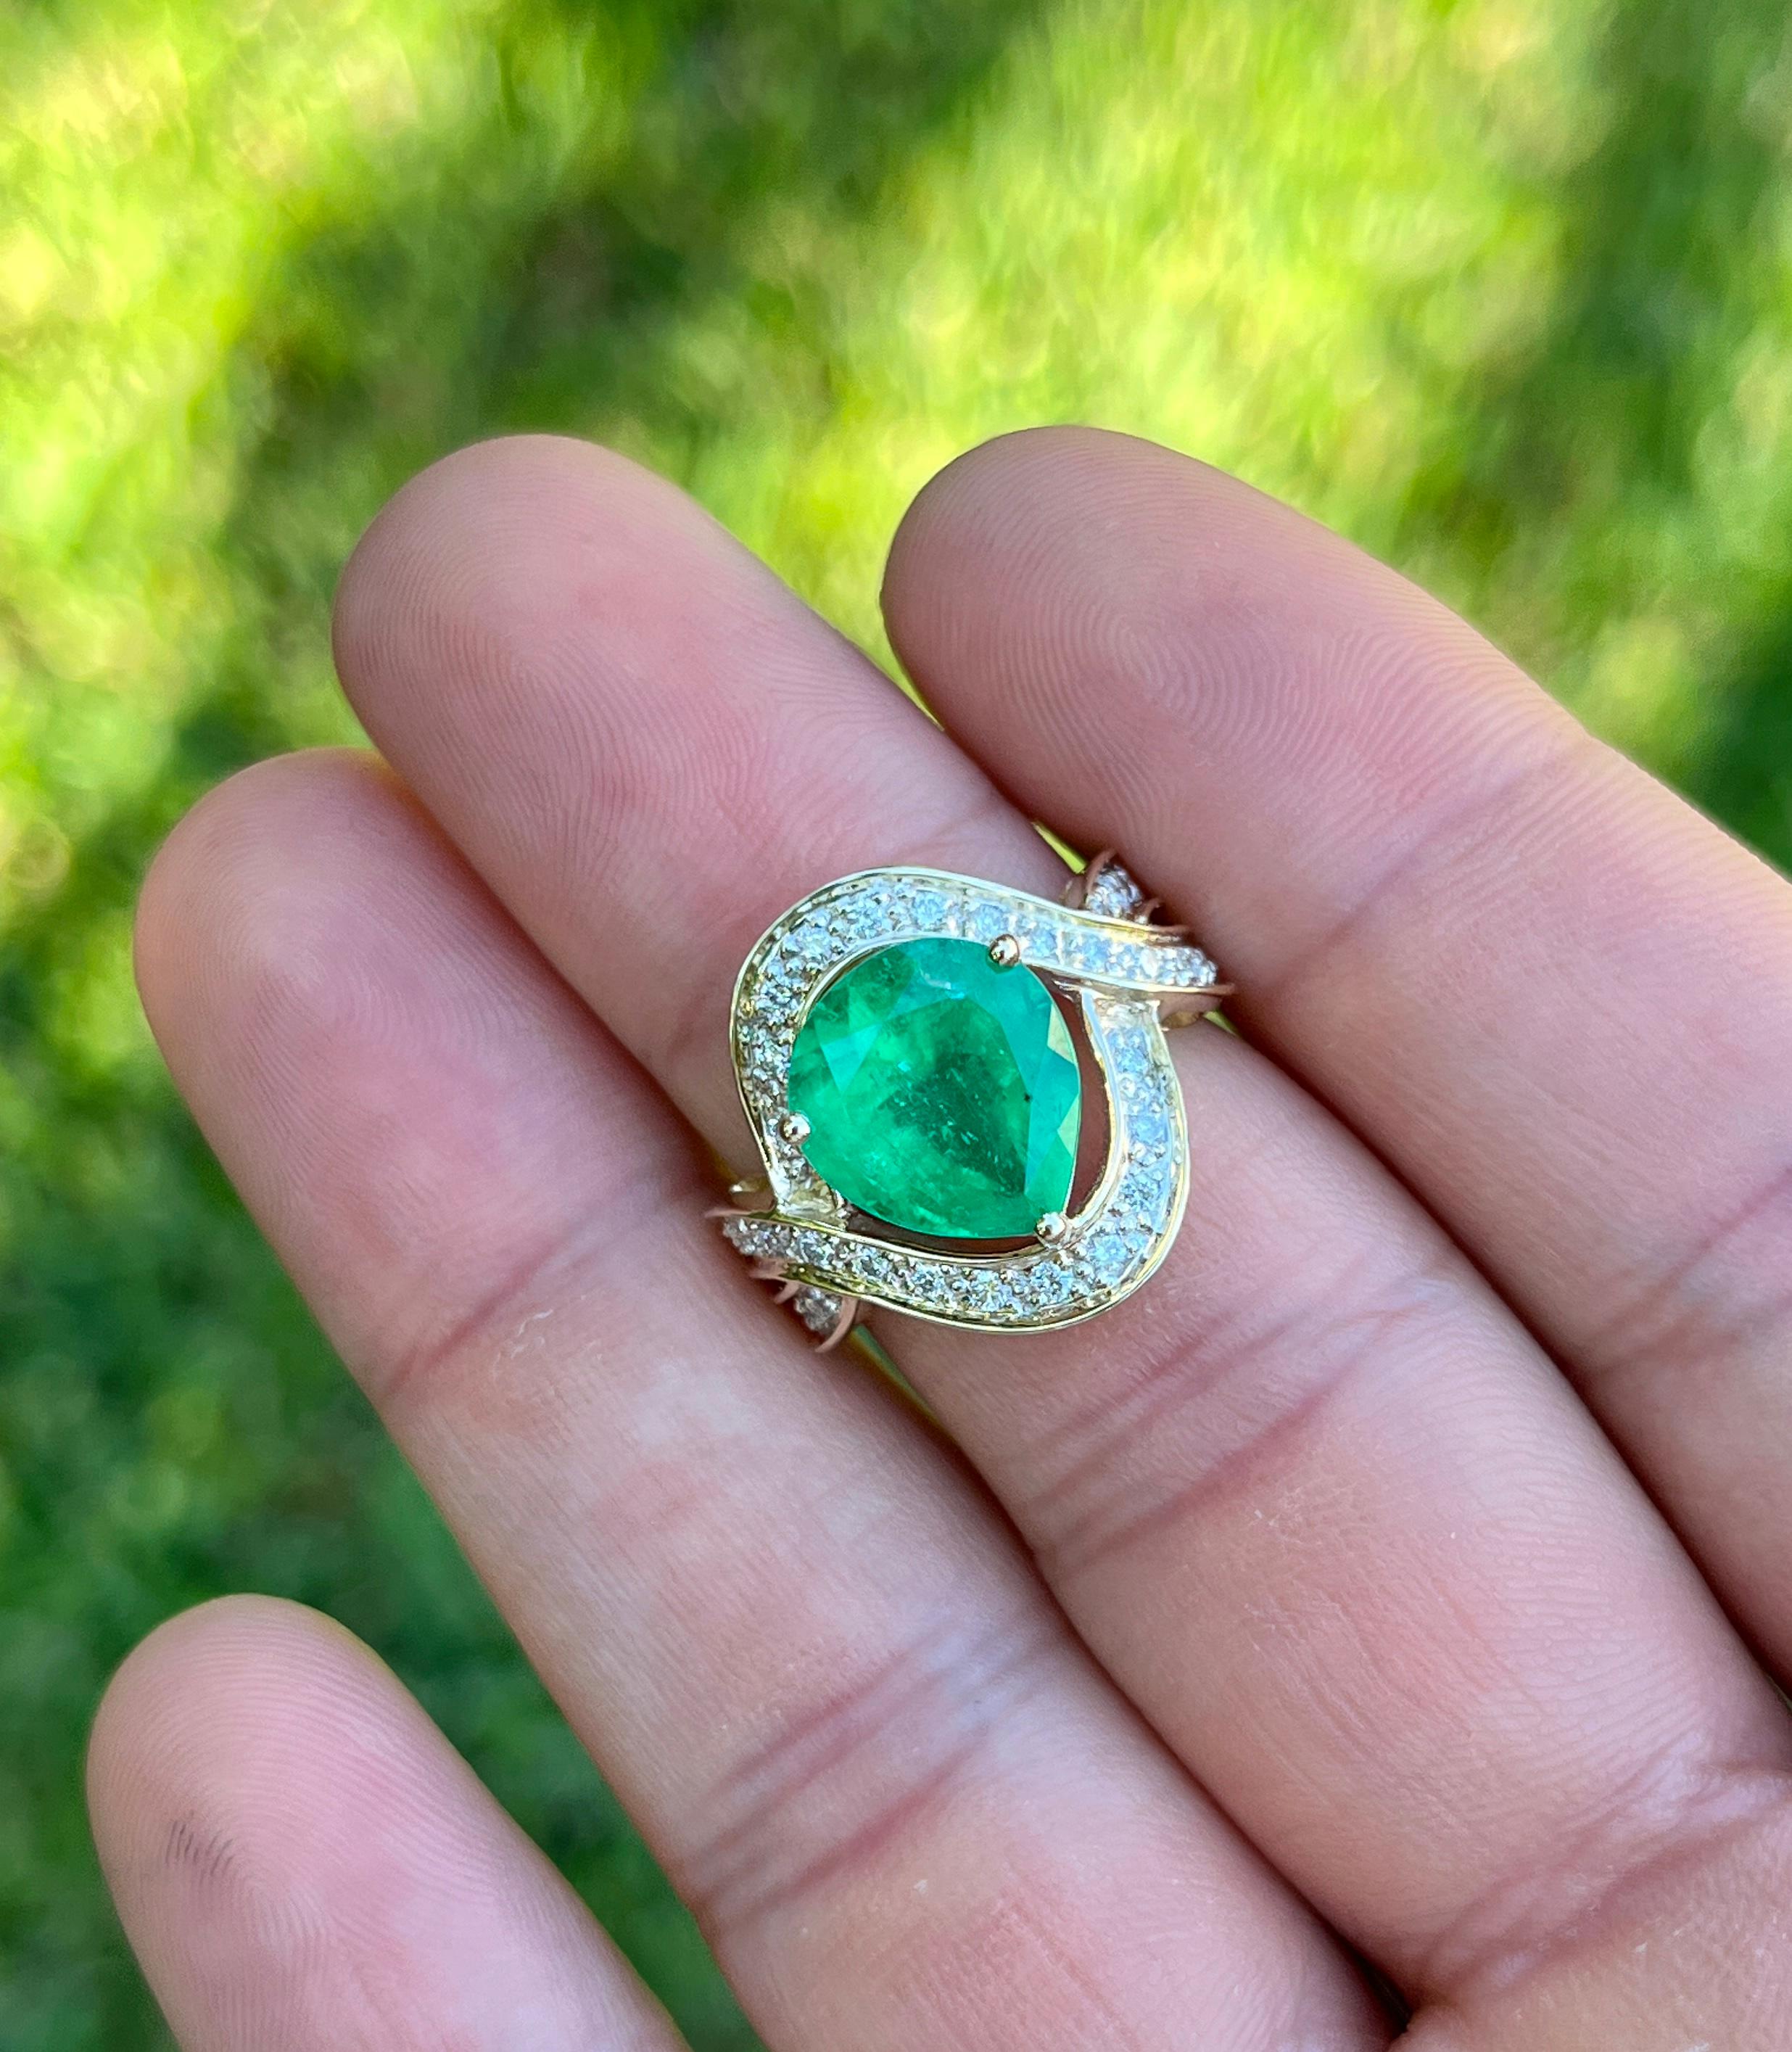 Art Deco-inspired natural emerald and diamond ring in 14k solid gold. Gemstones are stationed on a stunning split shank ring setting that encapsulated the center stone, providing excellent coverage on the finger.

Setting Details:
✔ Metal: 14k